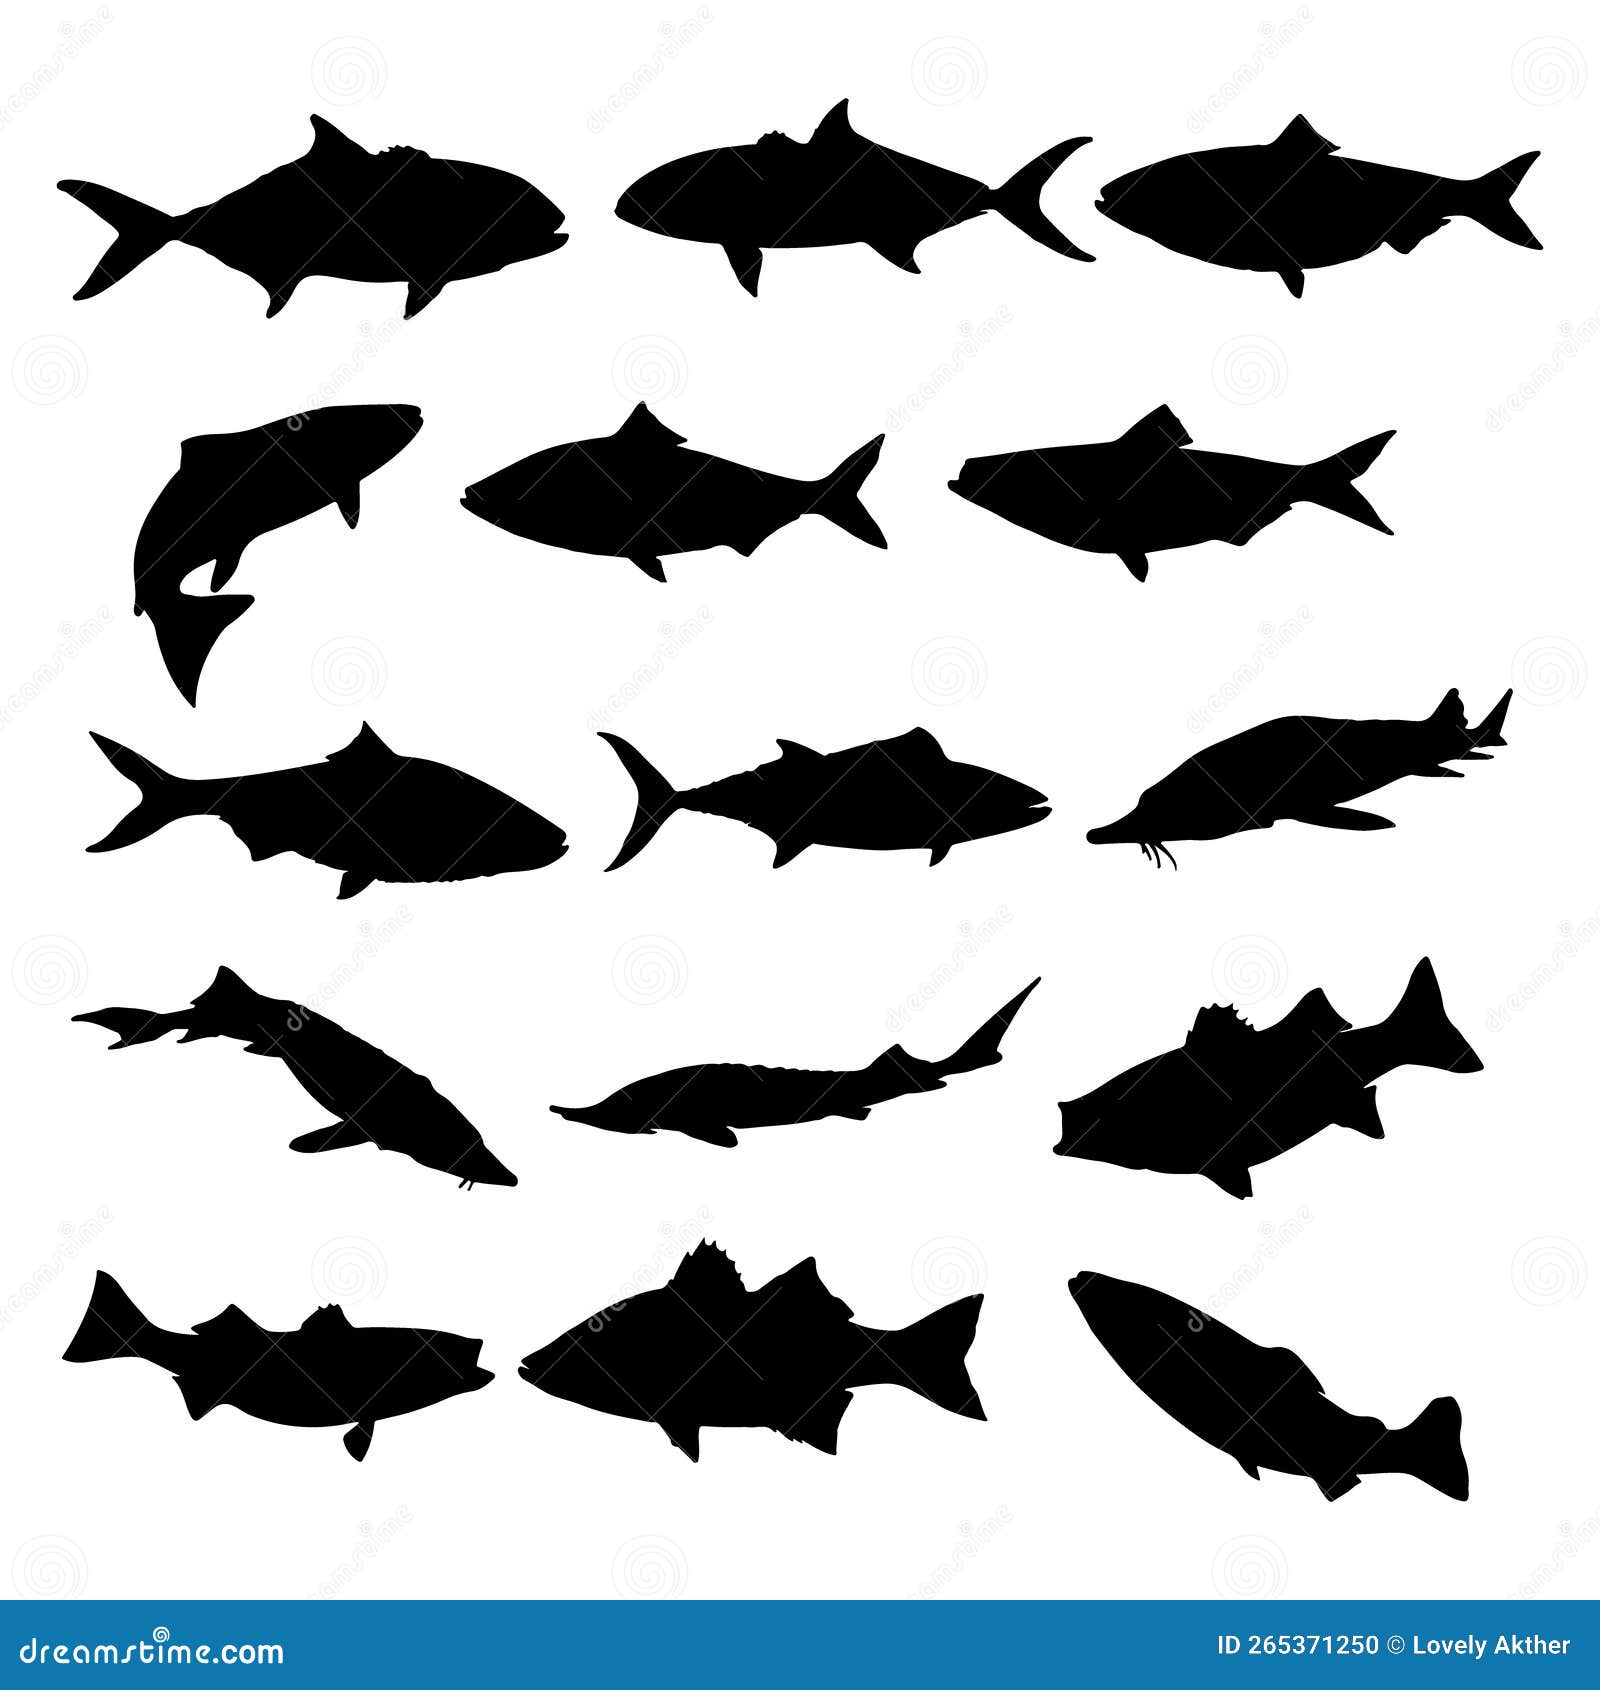 Black Fish Silhouette Vector Art,icons and Graphics. Stock Vector ...